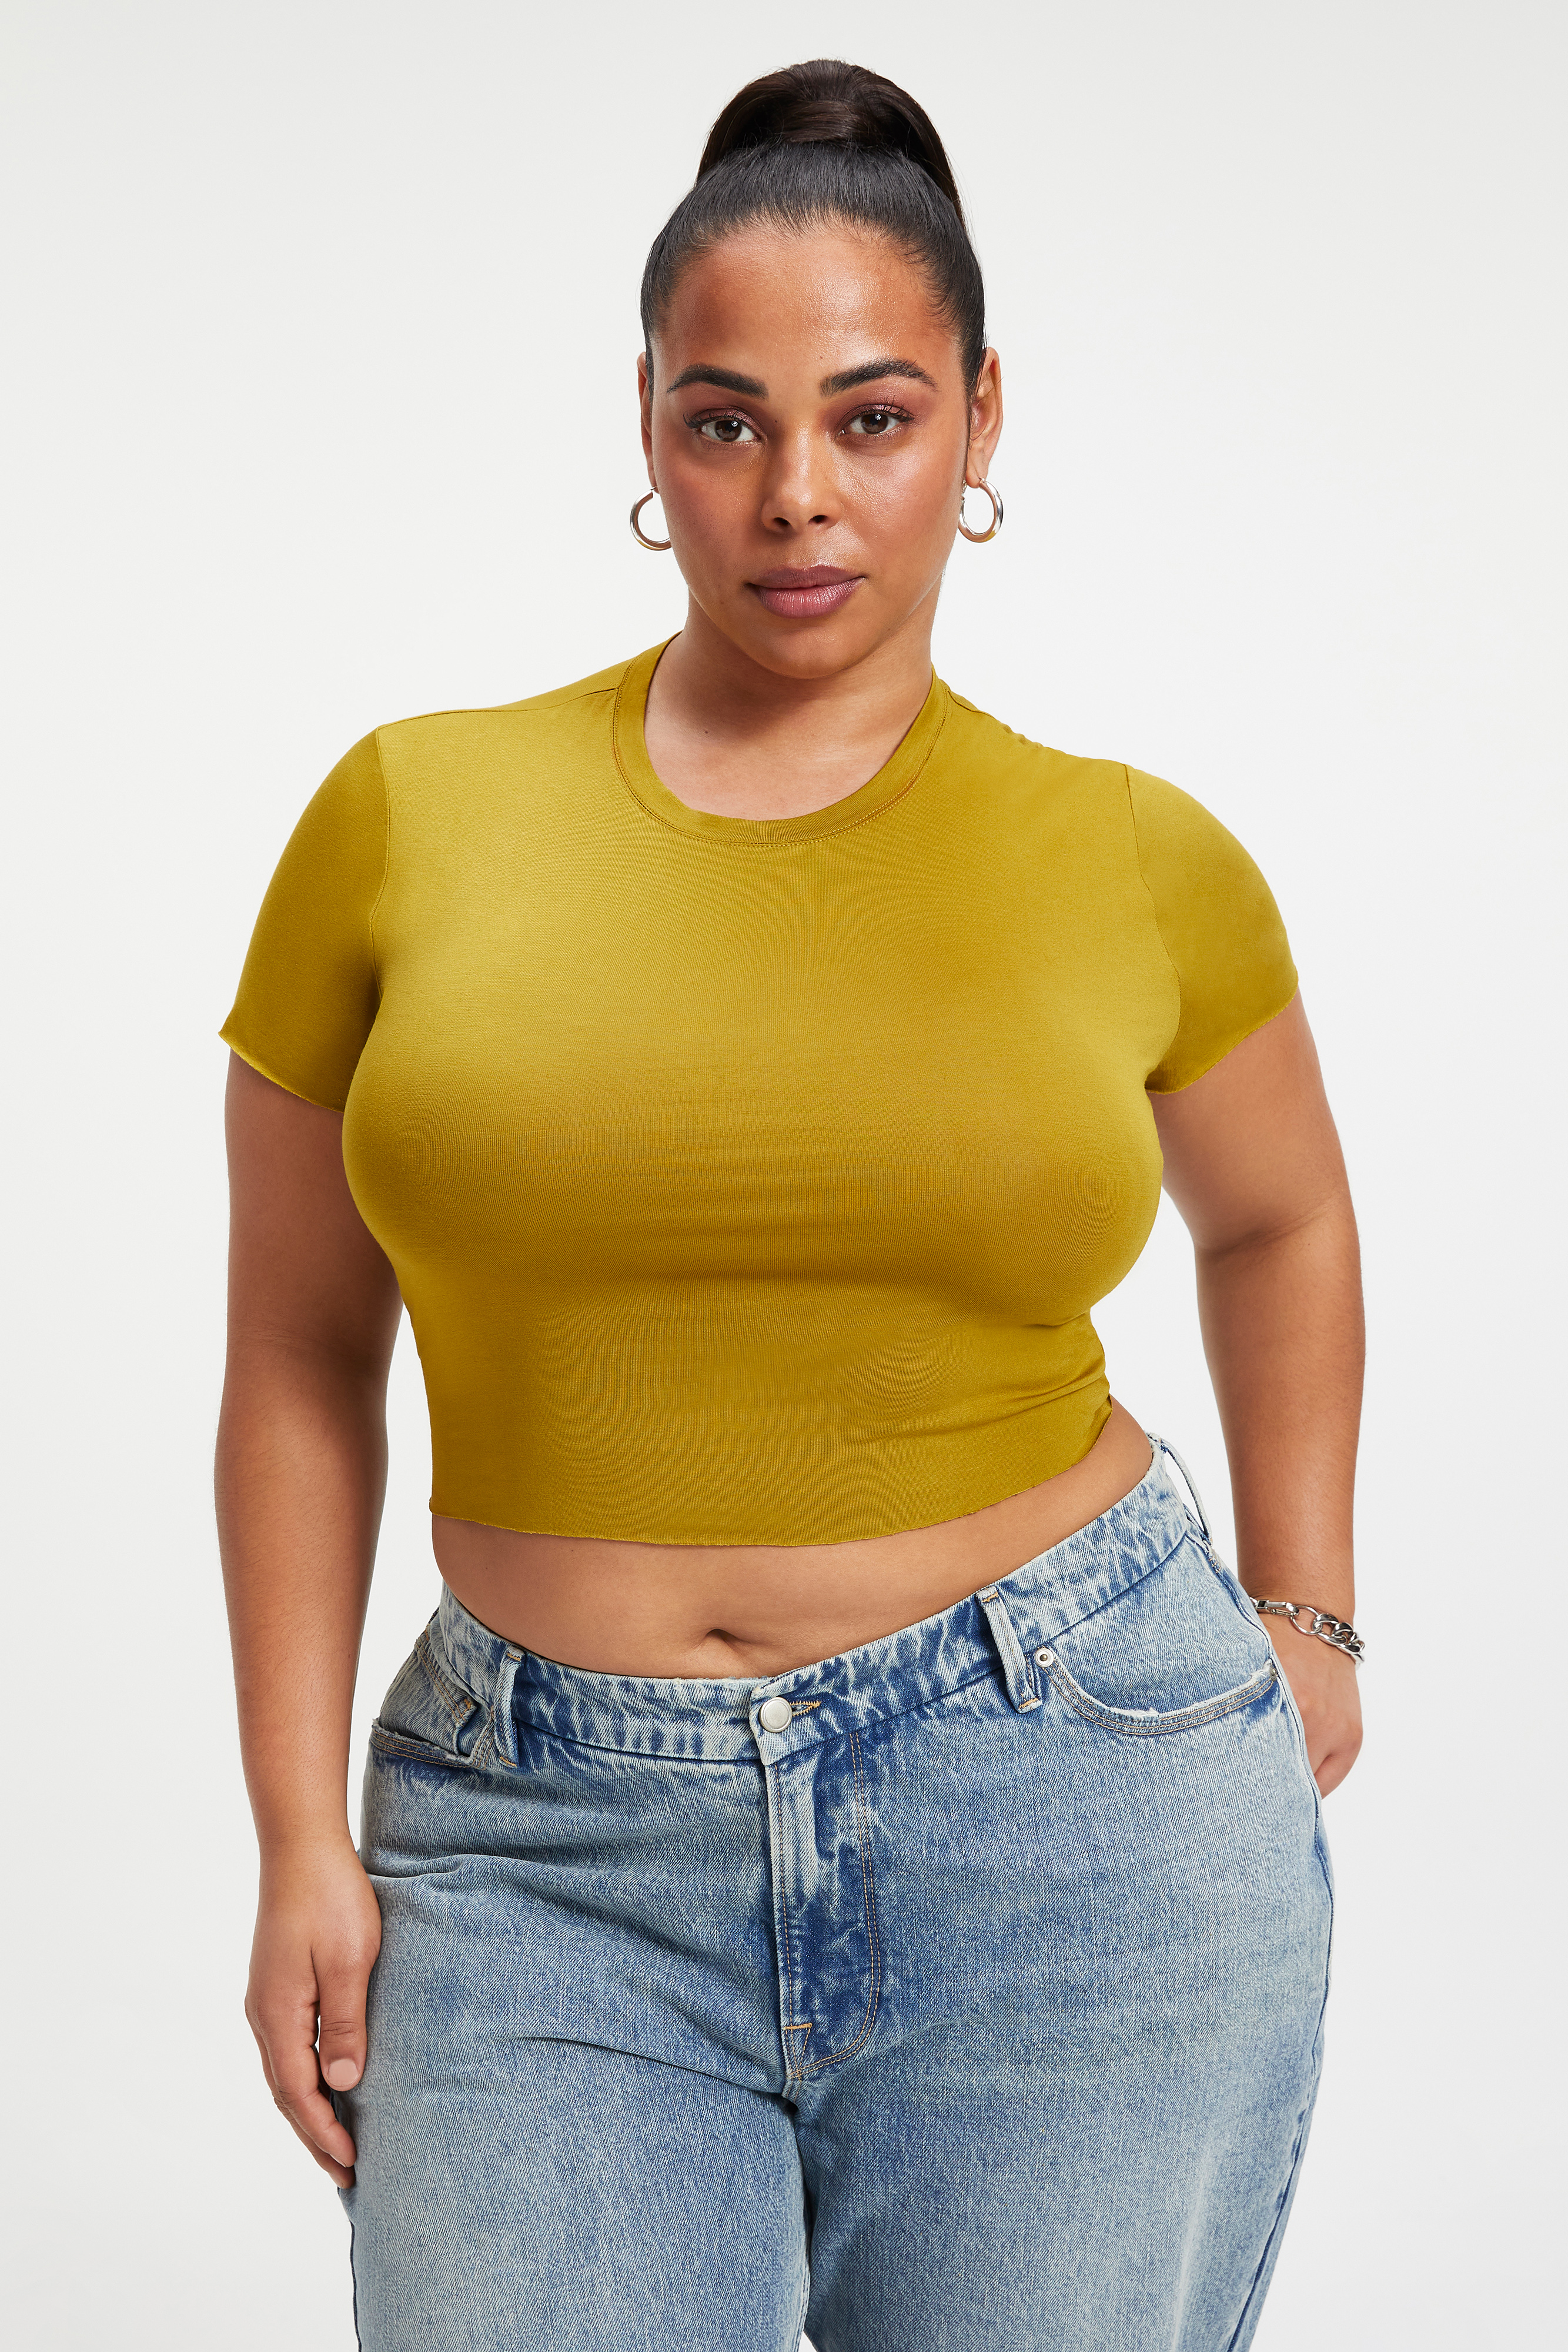 Crop Tops Are The Spring's Hottest Looks  Fashion clothes women, Fashion,  Crop top outfits